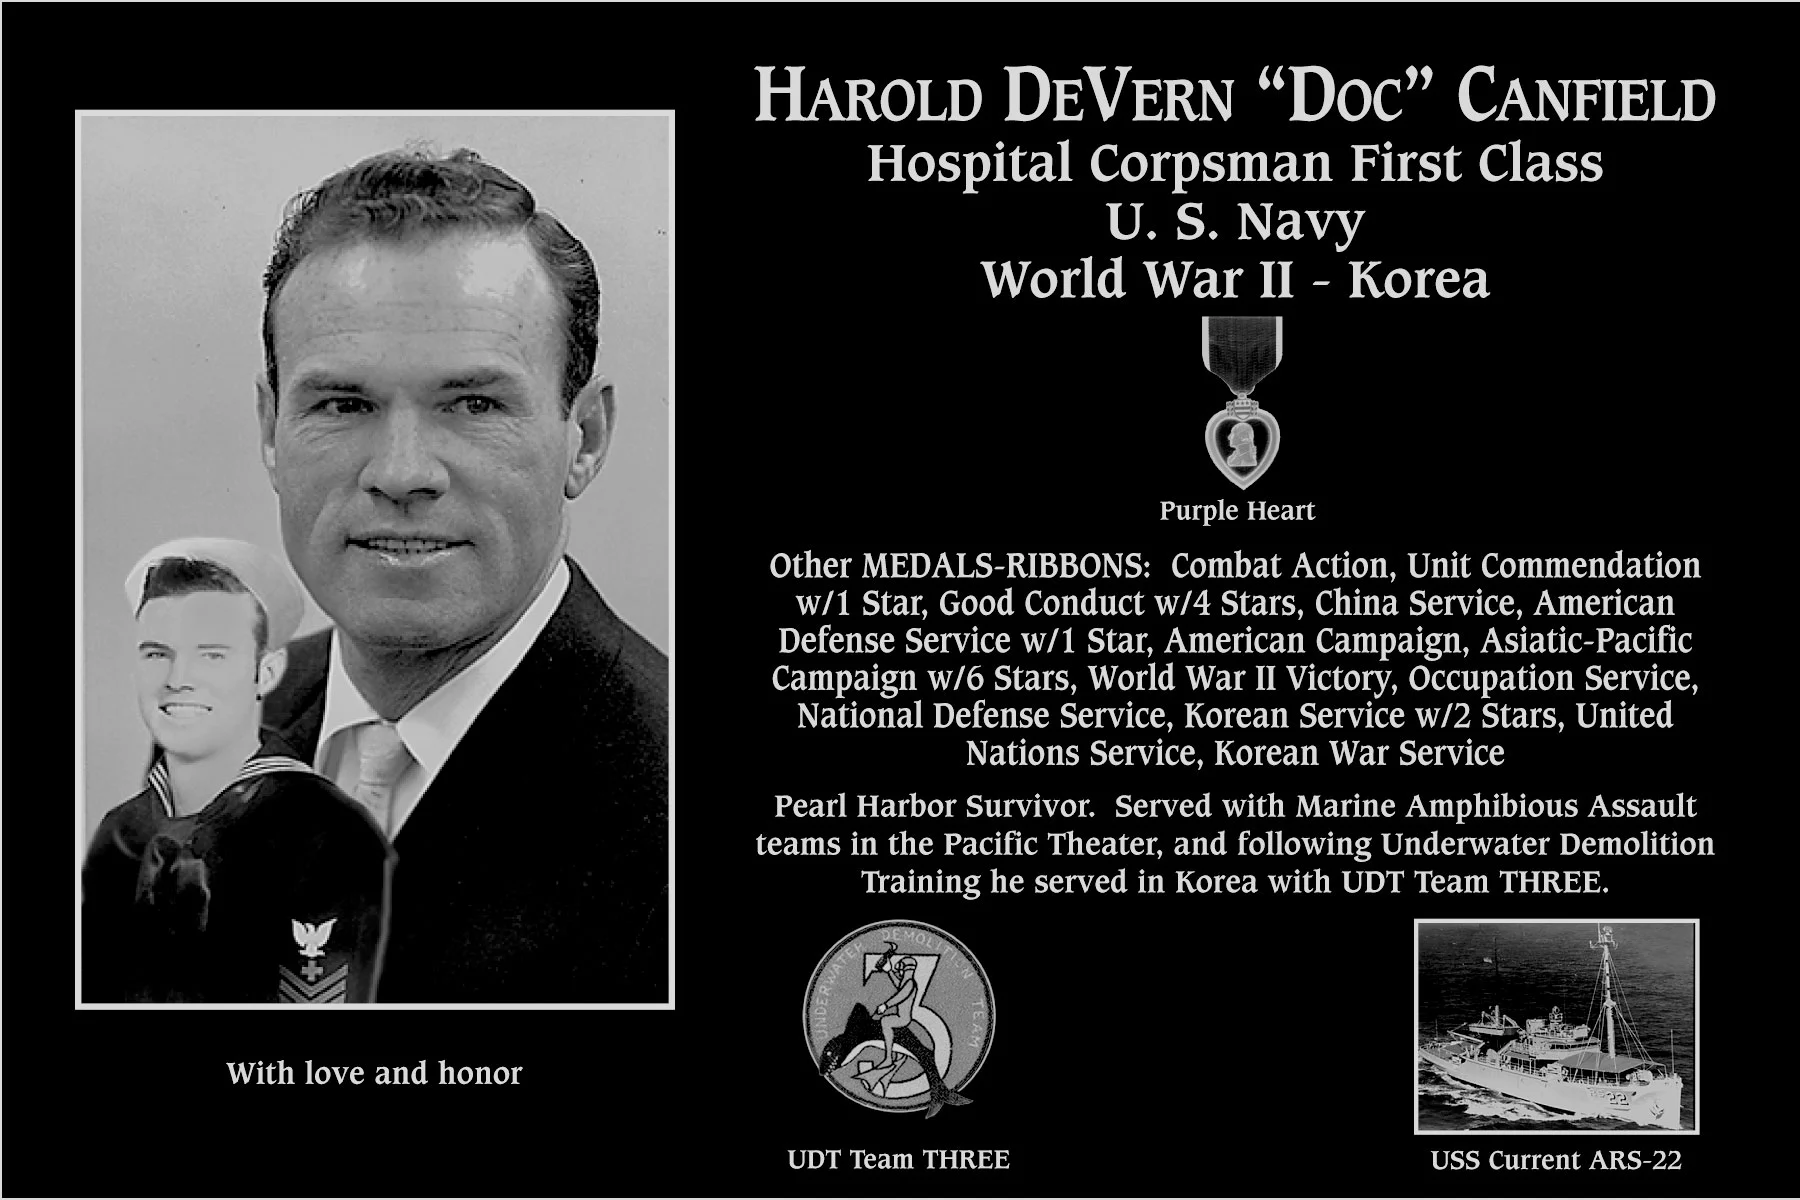 Harold DeVern “Doc” Canfield